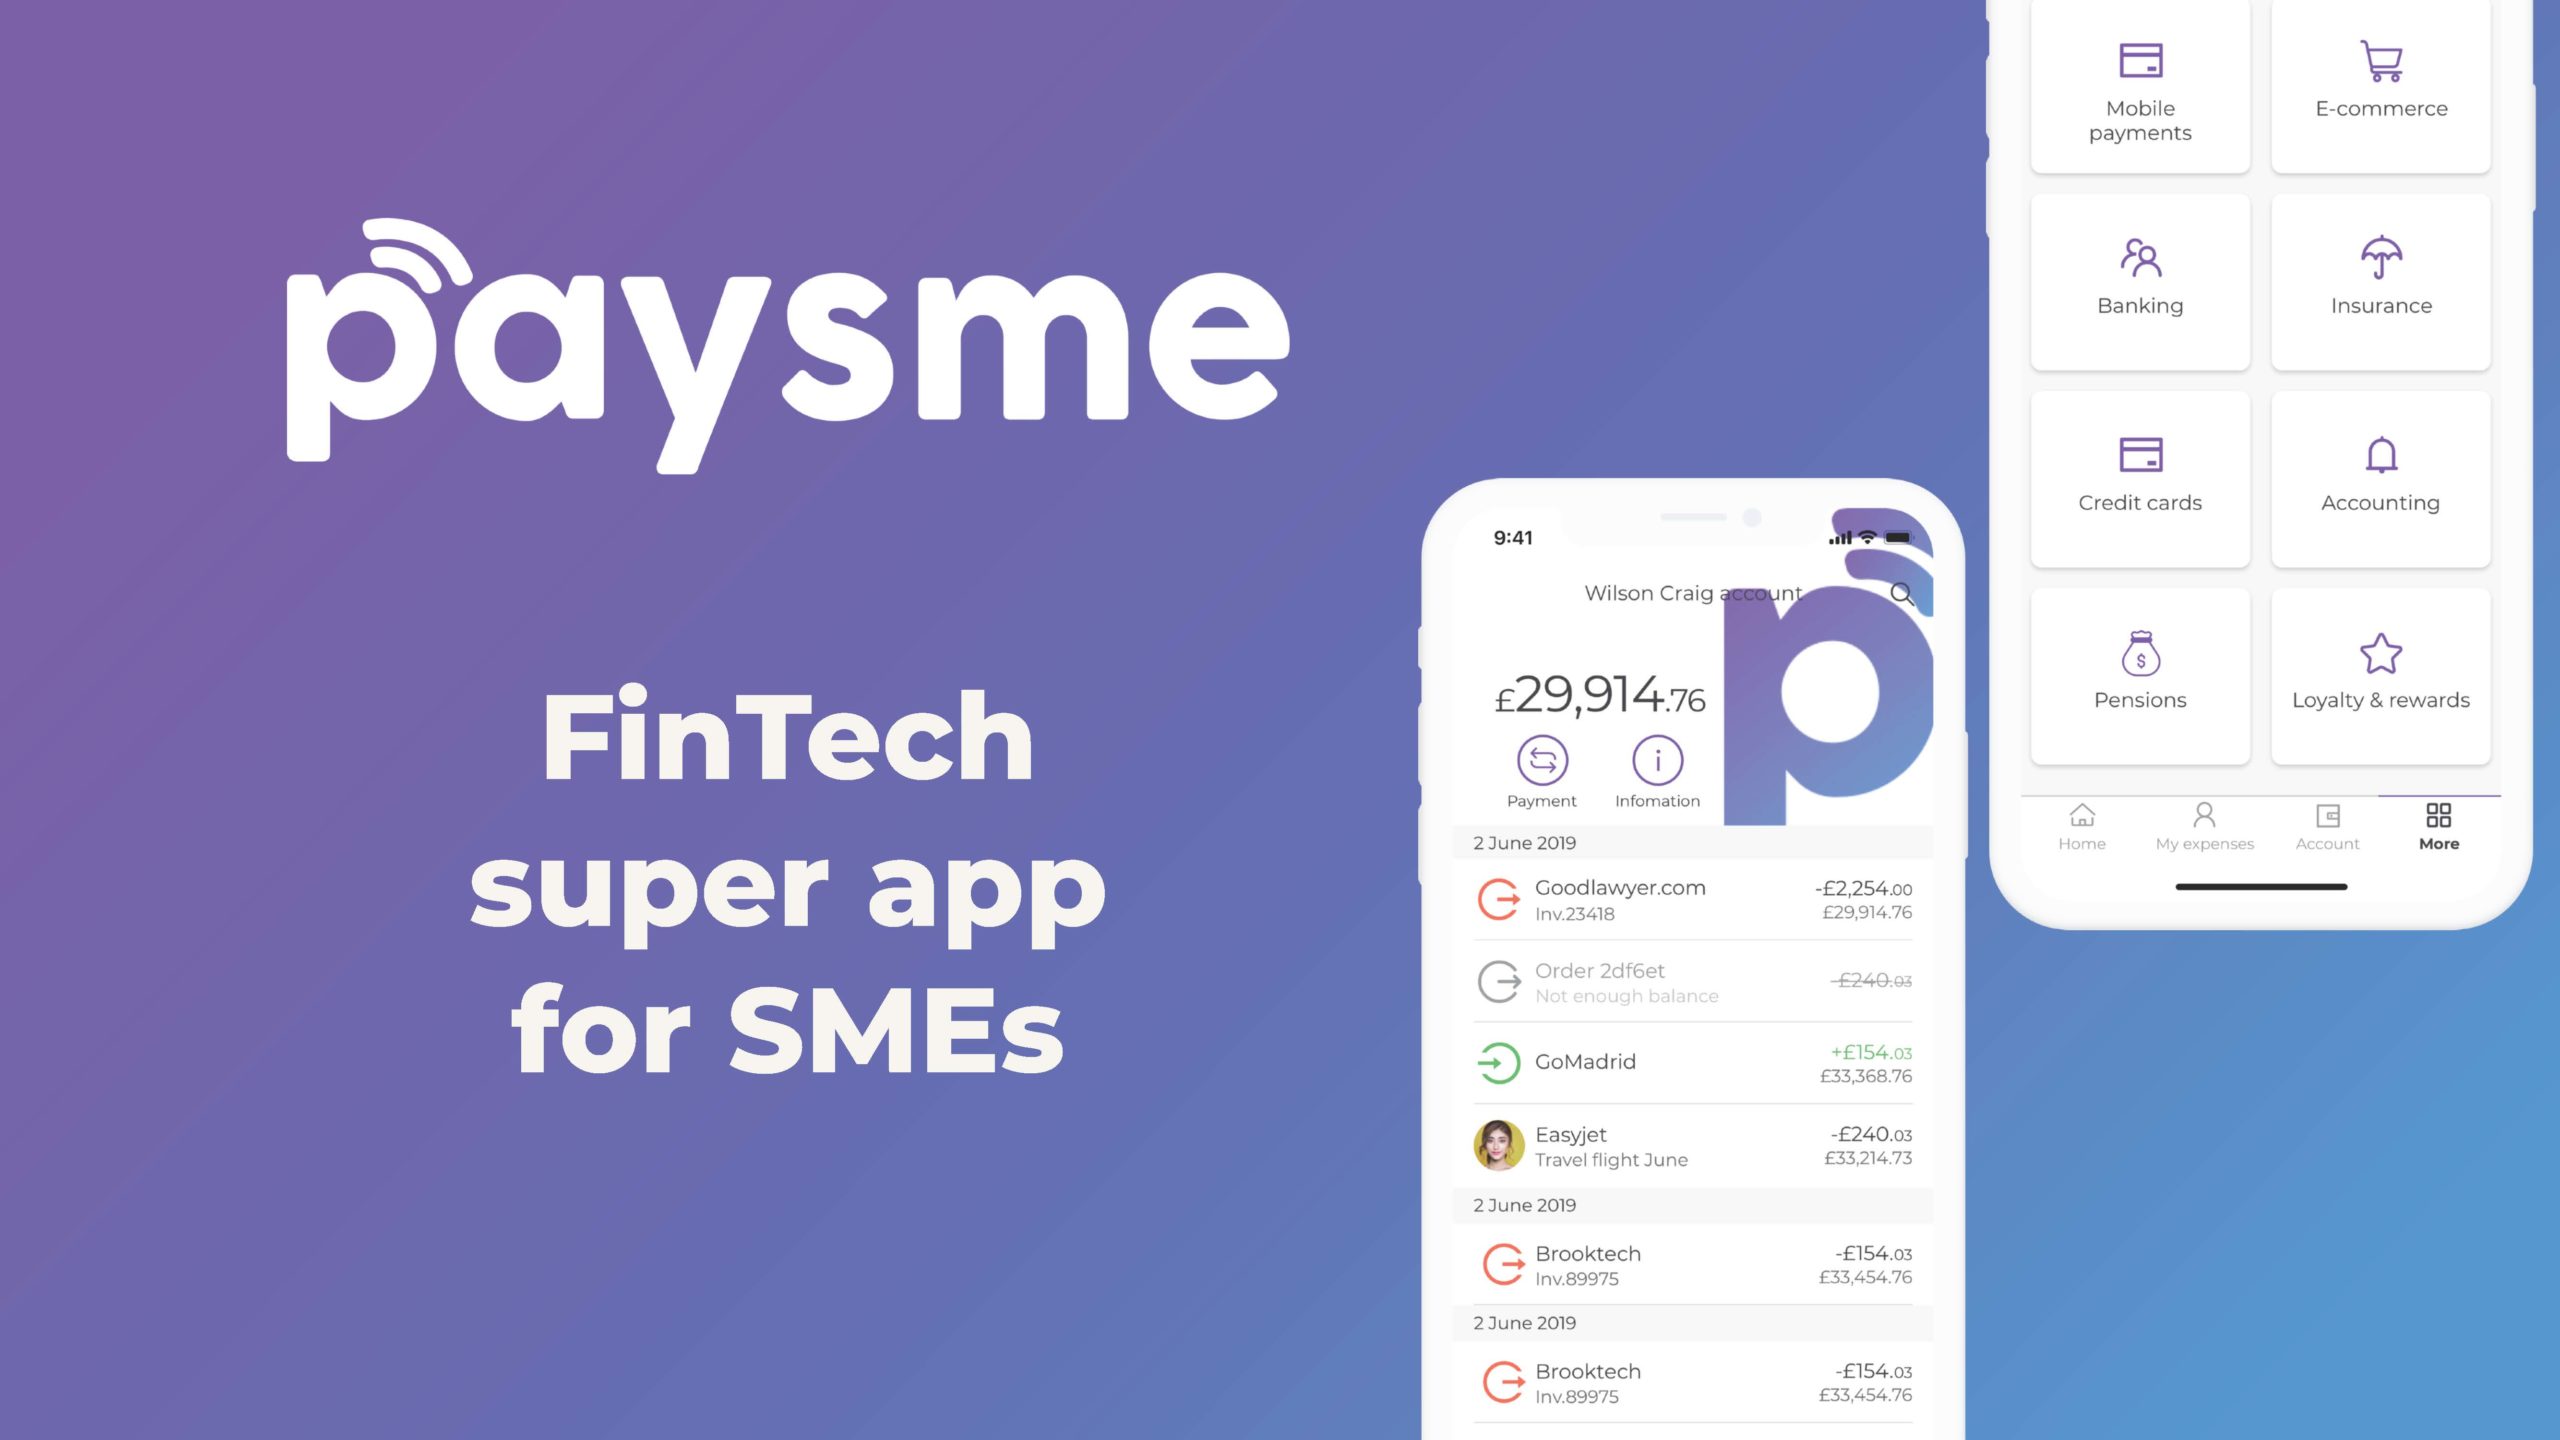 Video: The Creation of Paysme, Obstacles & How to Overcome Them